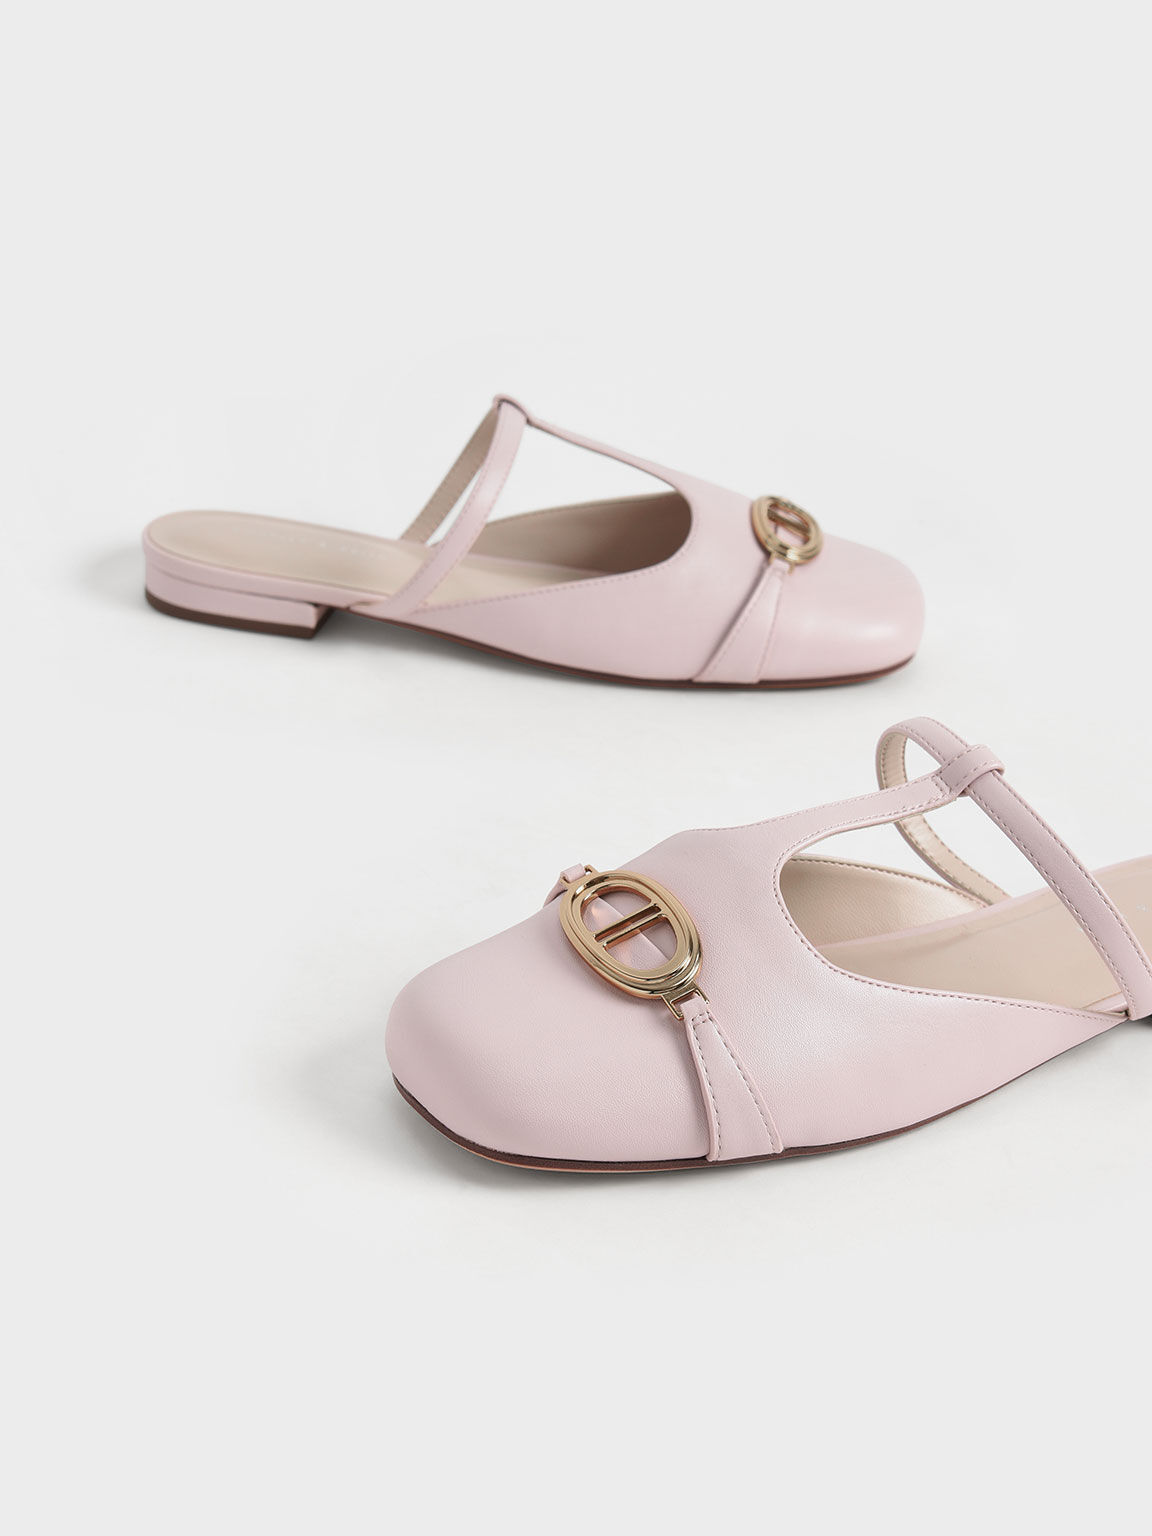 Metallic Accent Cut-Out Flat Mules, Light Pink, hi-res